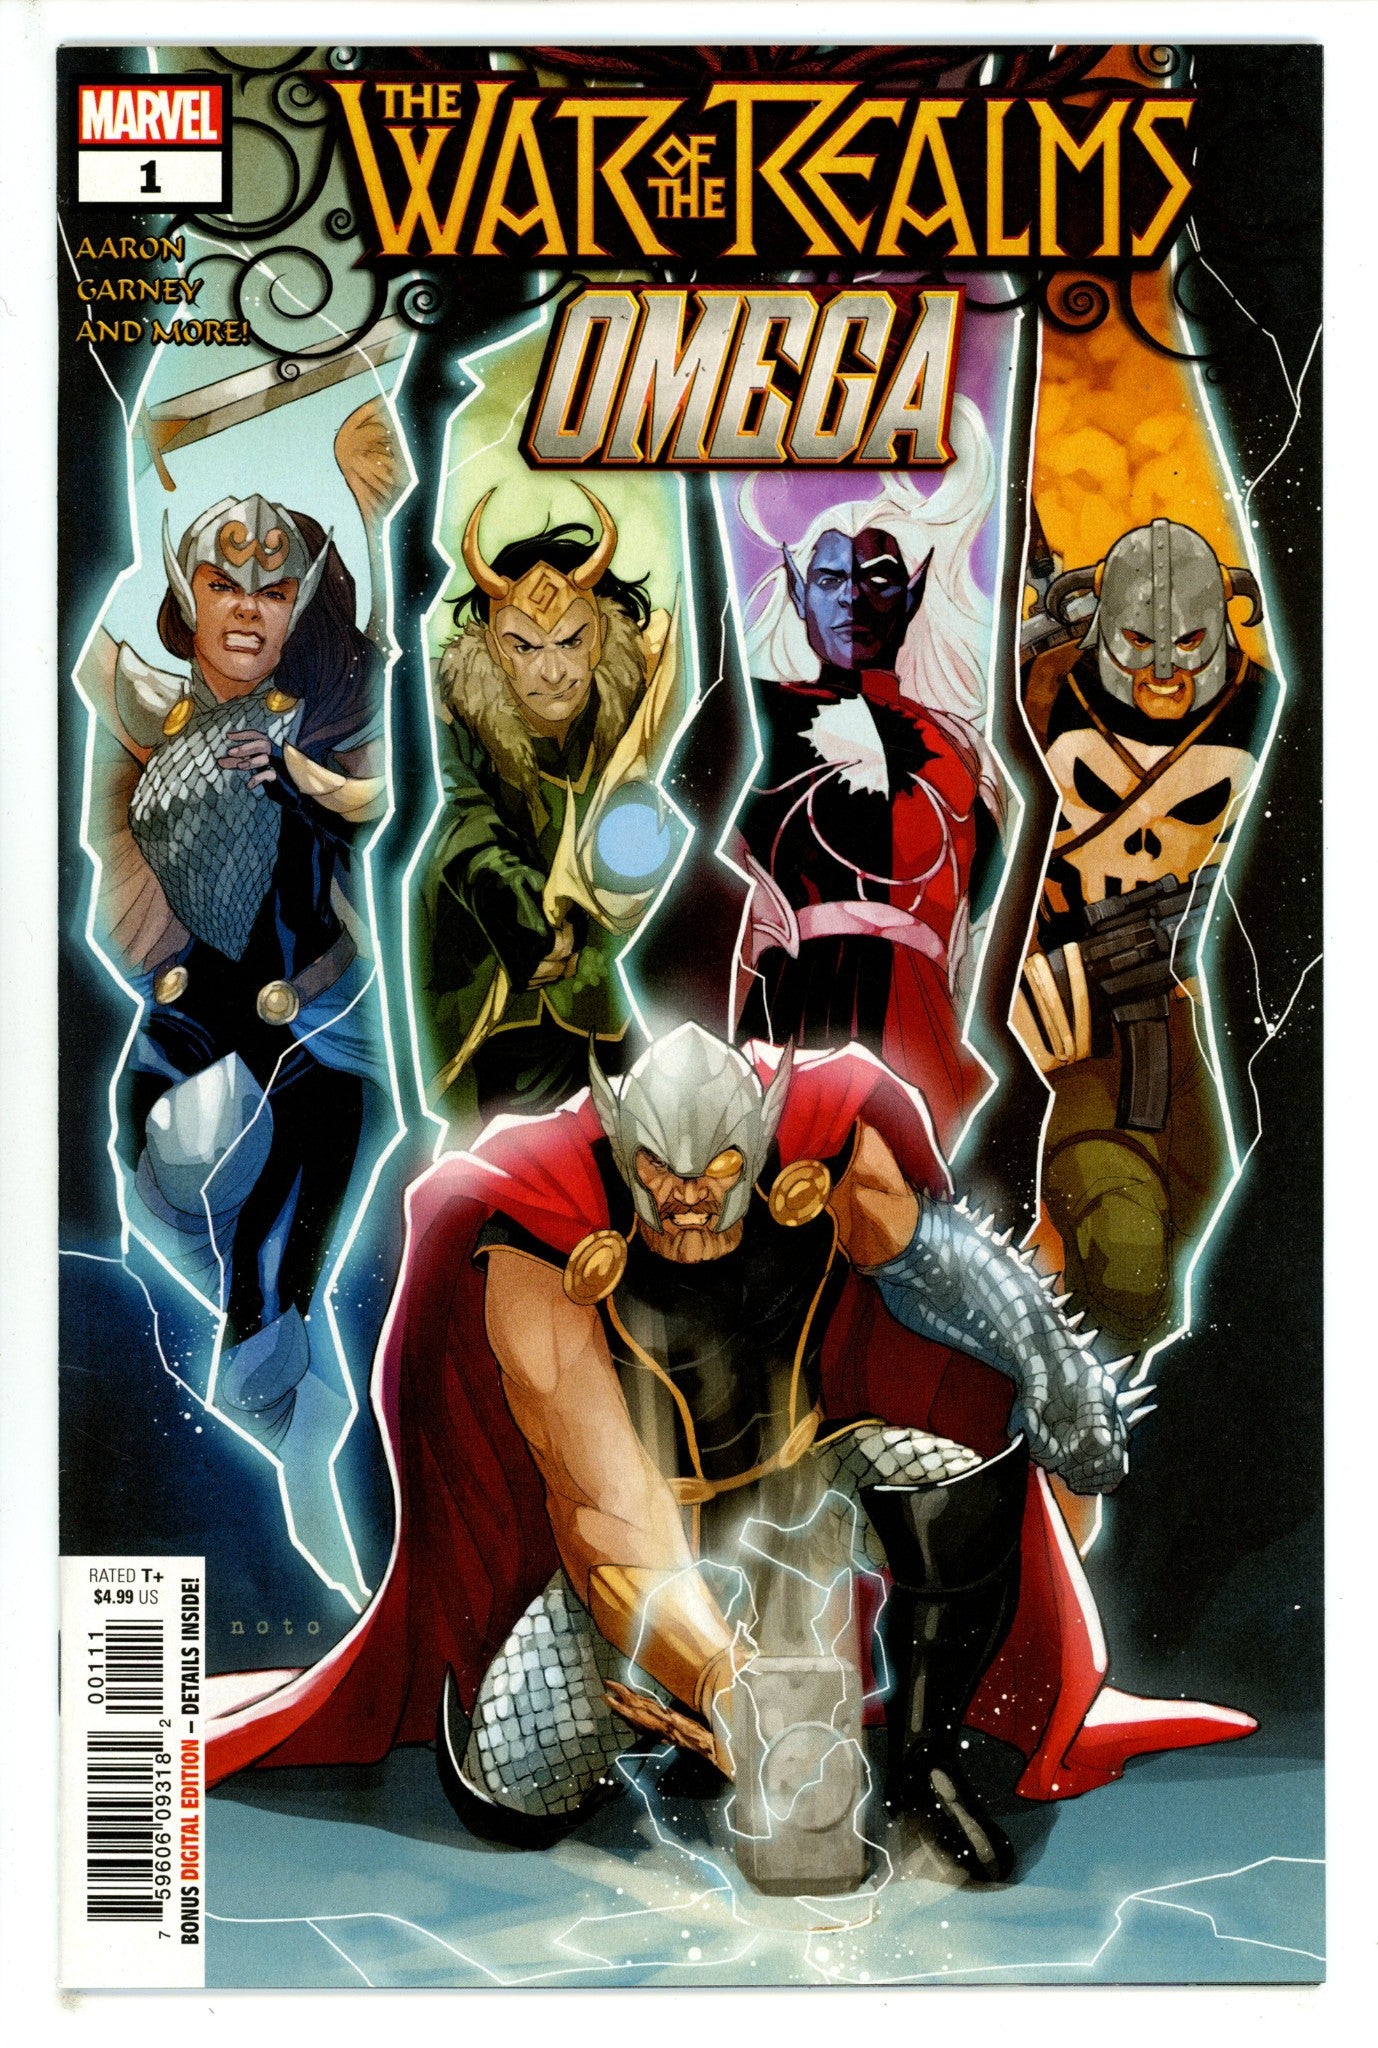 War of the Realms Omega 1 (2019)